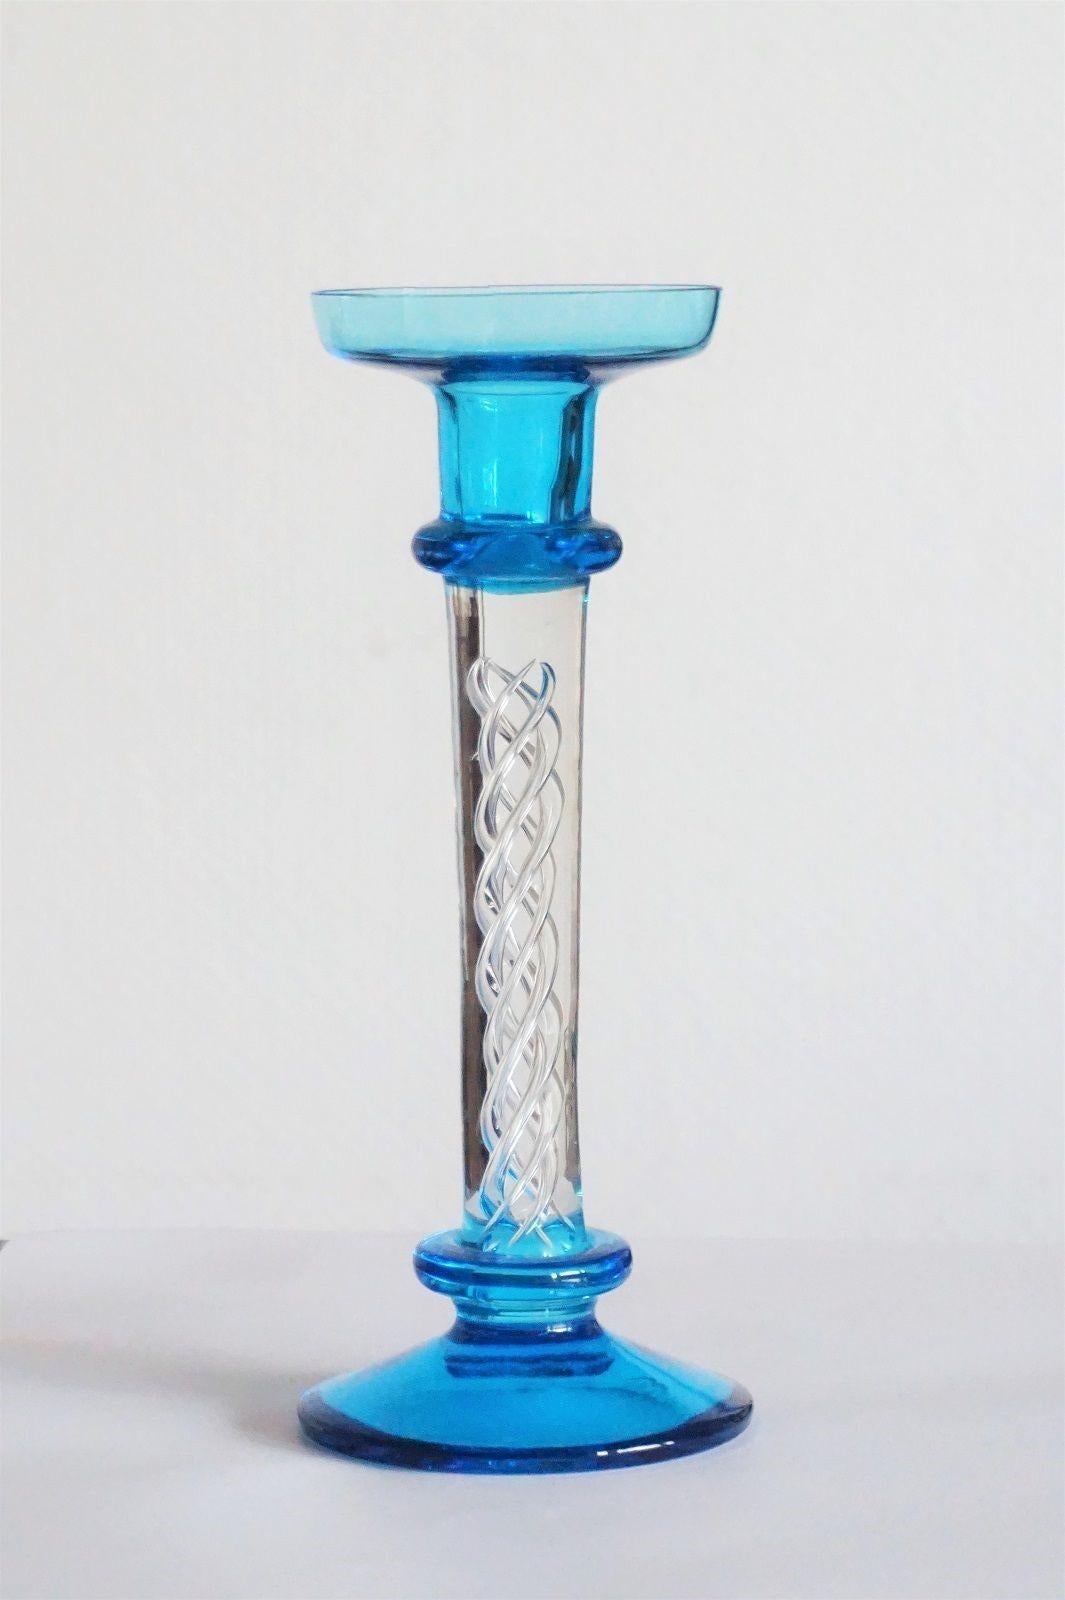 Murano clear and turquoise glass candlestick with beautiful glass artwork inside, 1960s, without damage.
Measures: Height 9.45 in (24 cm)
Diameter/base 3.94 in (10 cm)
Diameter/top 3.35 in (8.50 cm.

Very good condition, no chips or cracks.